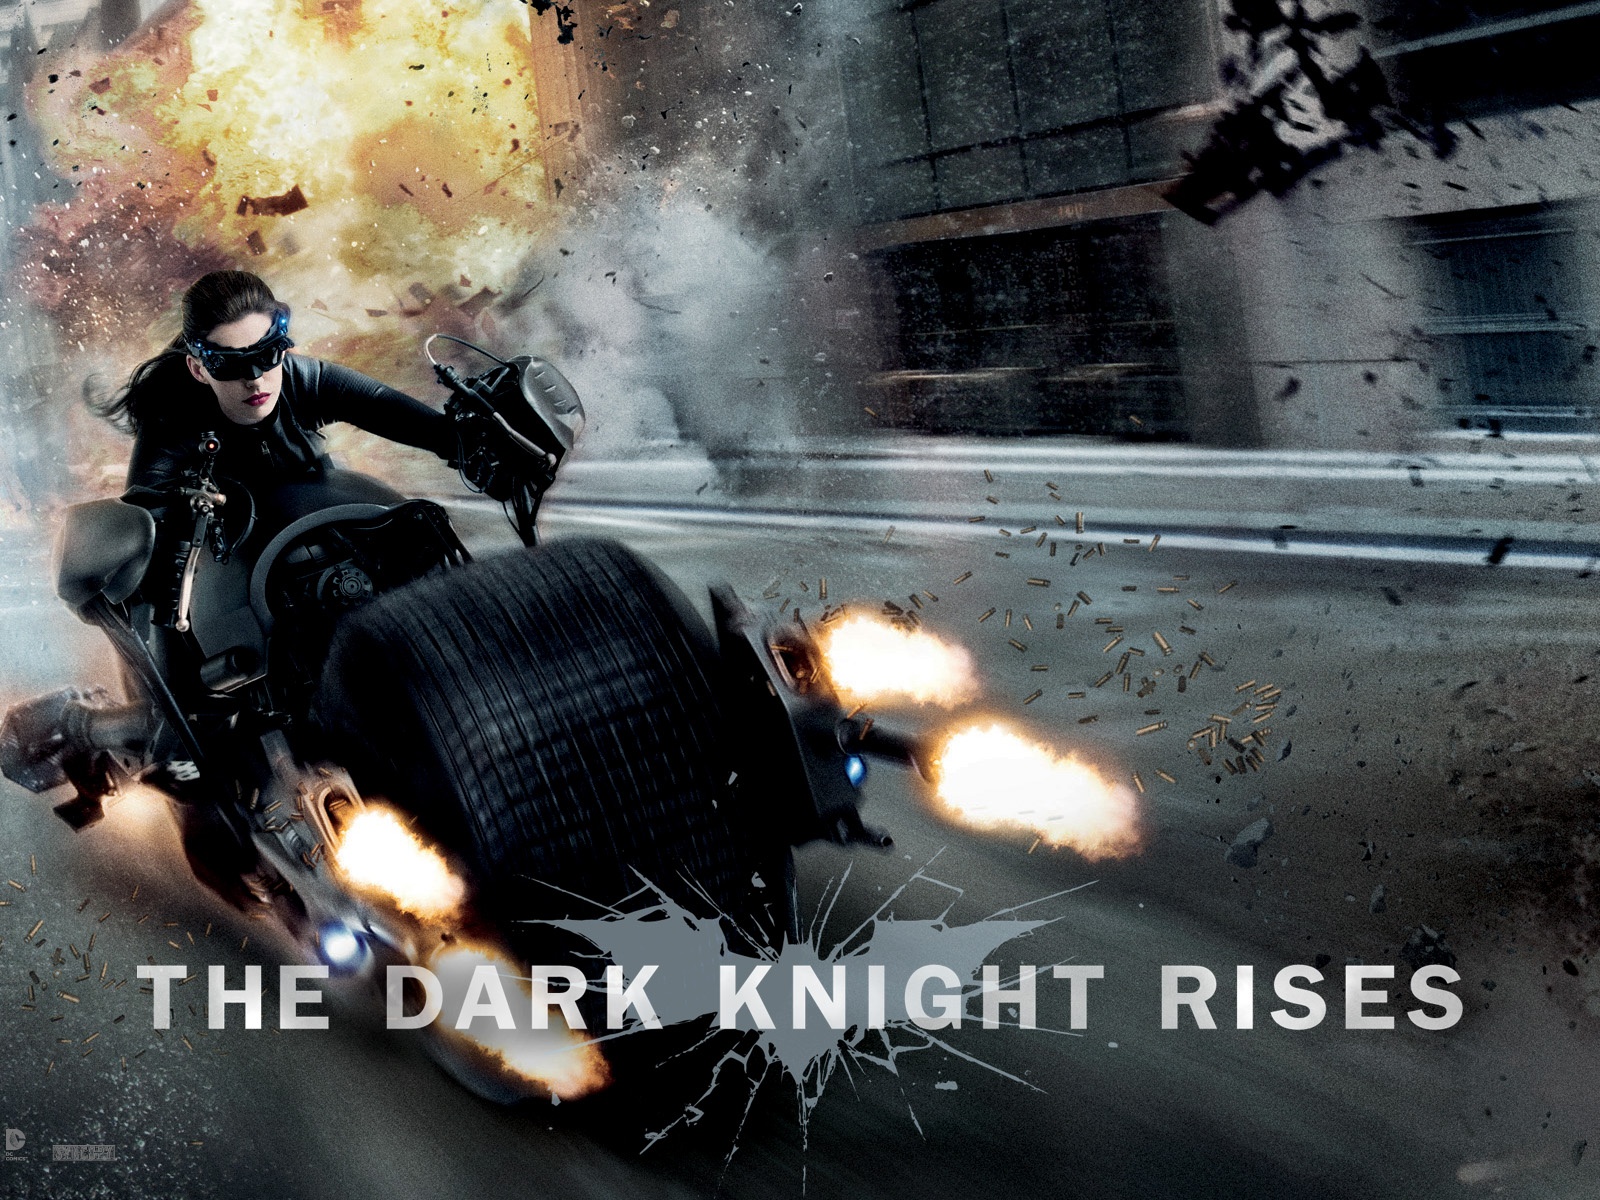 Free Photos of Movies, Anne Hathaway in the Dark Knight Rises, on Motorcar, Let Bullets Fly!--1600X1200 free wallpaper download